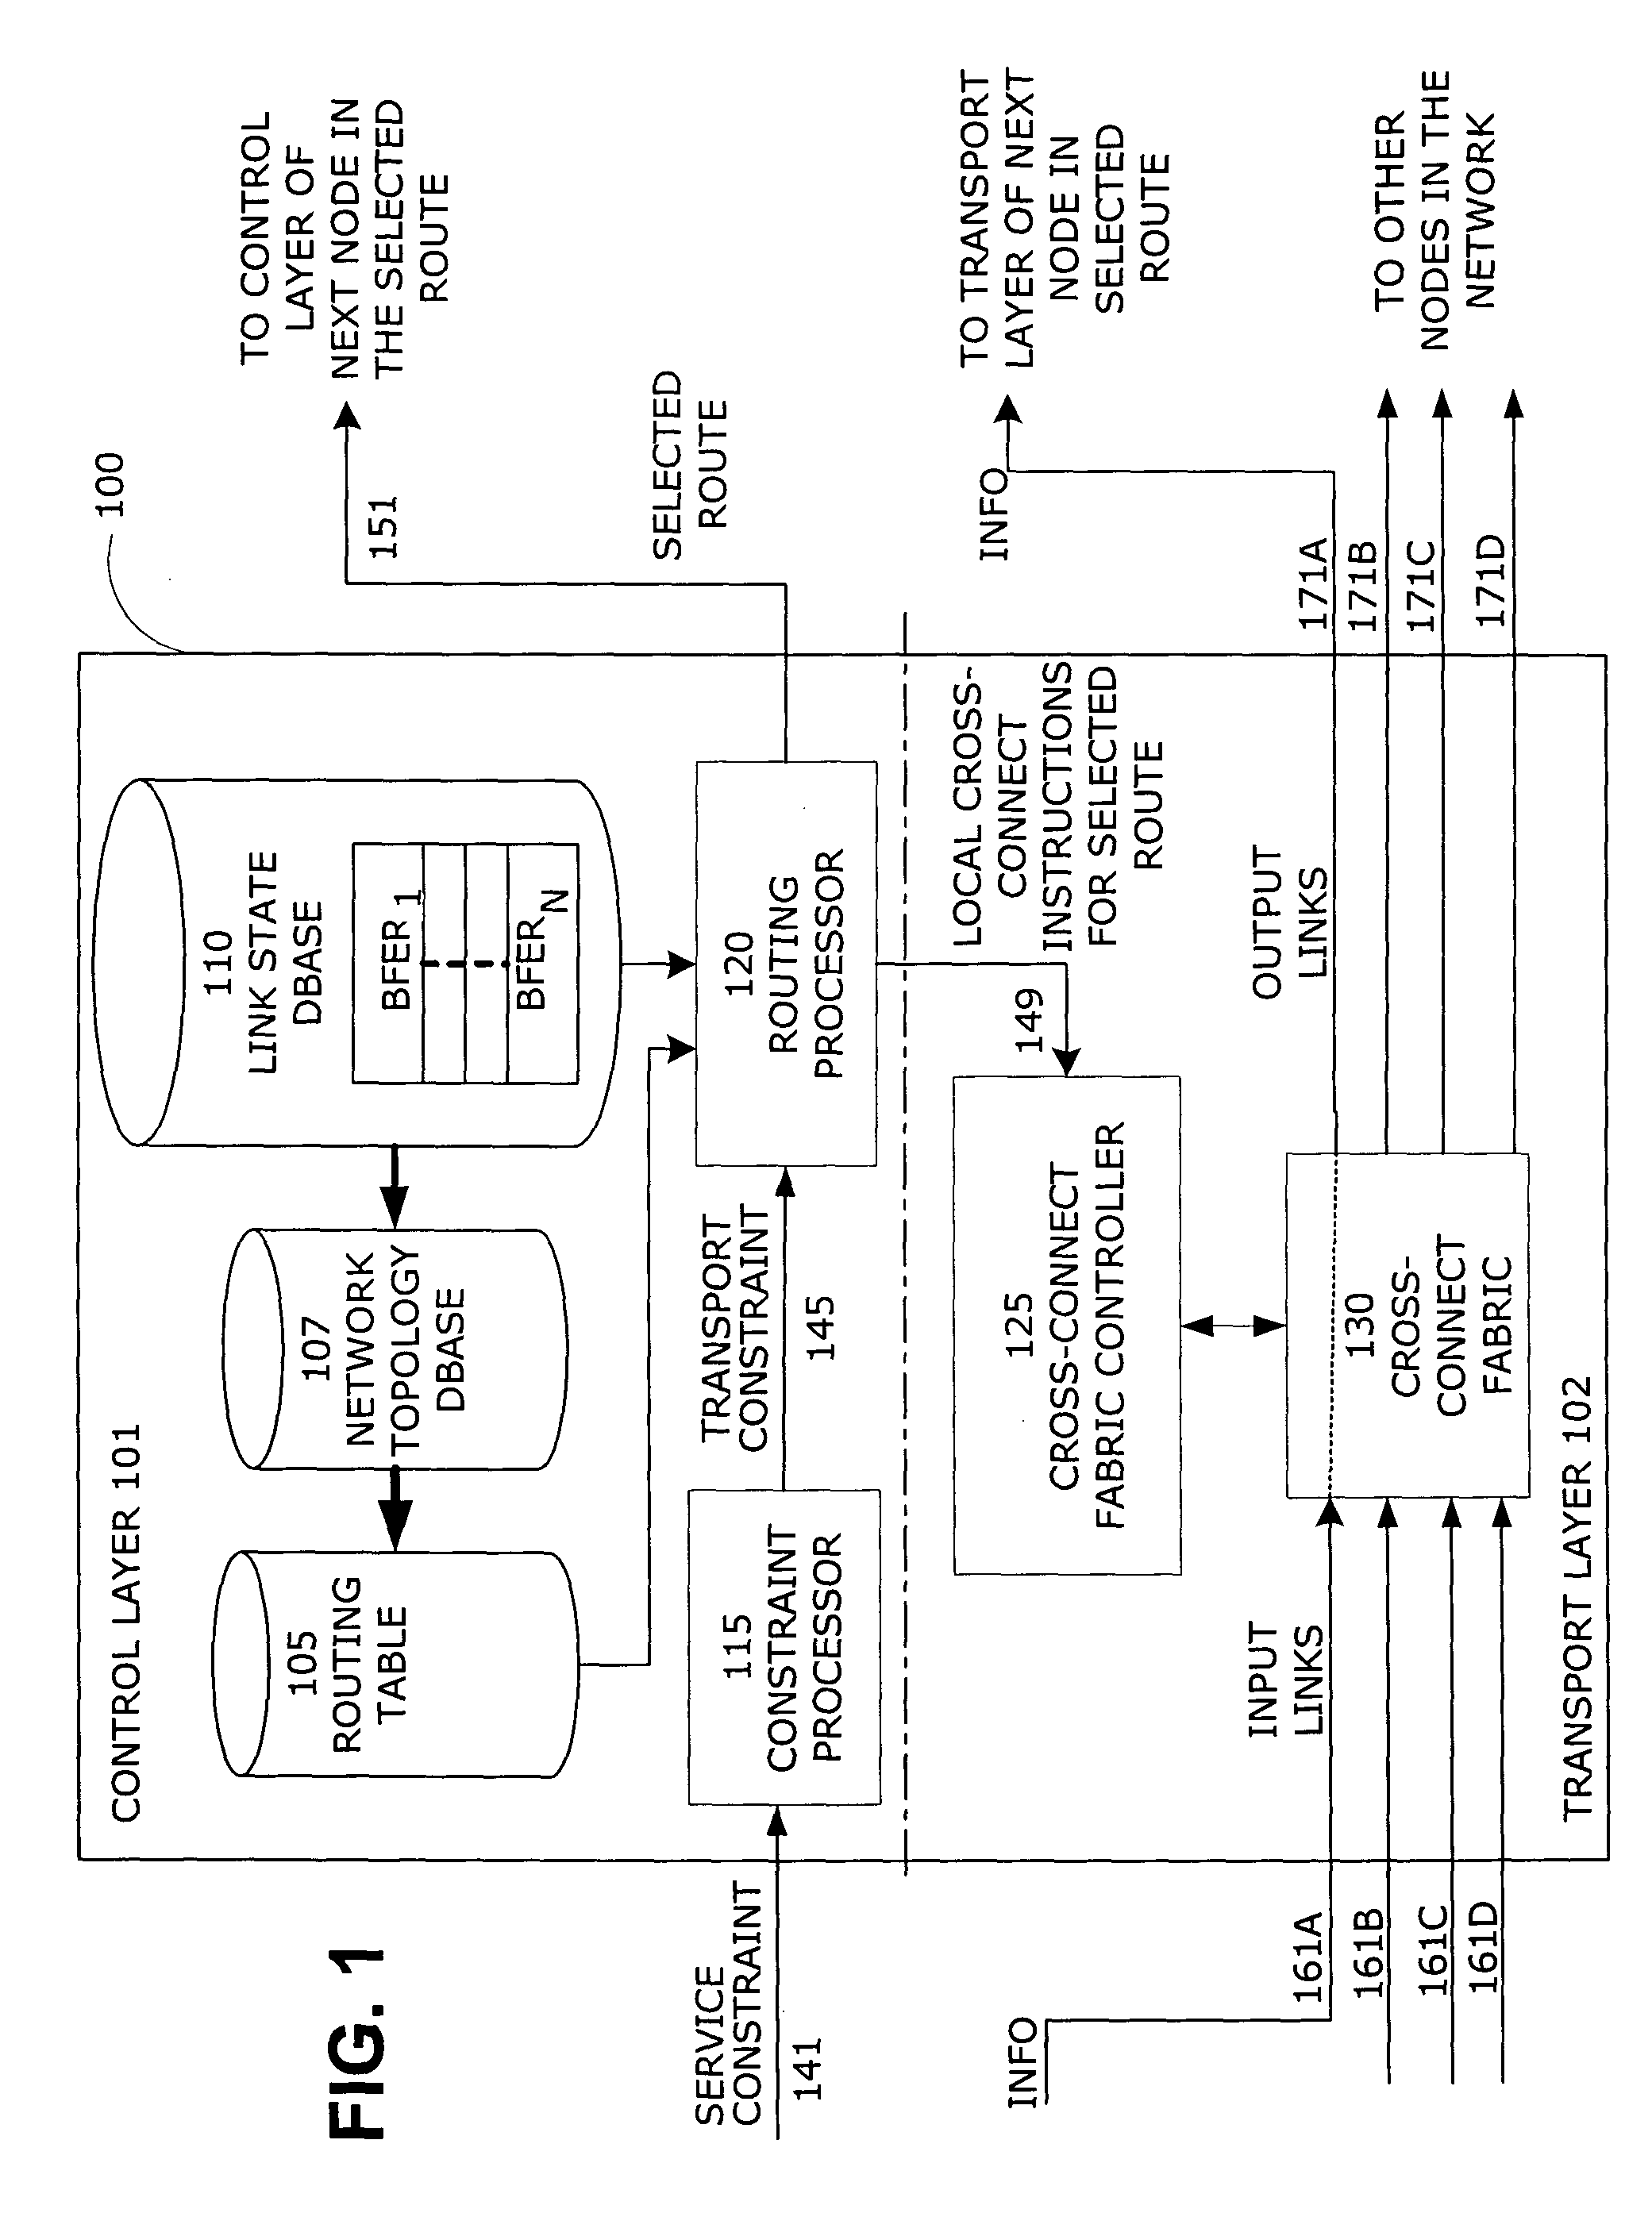 Bit-field-encoded resource record for determining a transmission path in a communications network